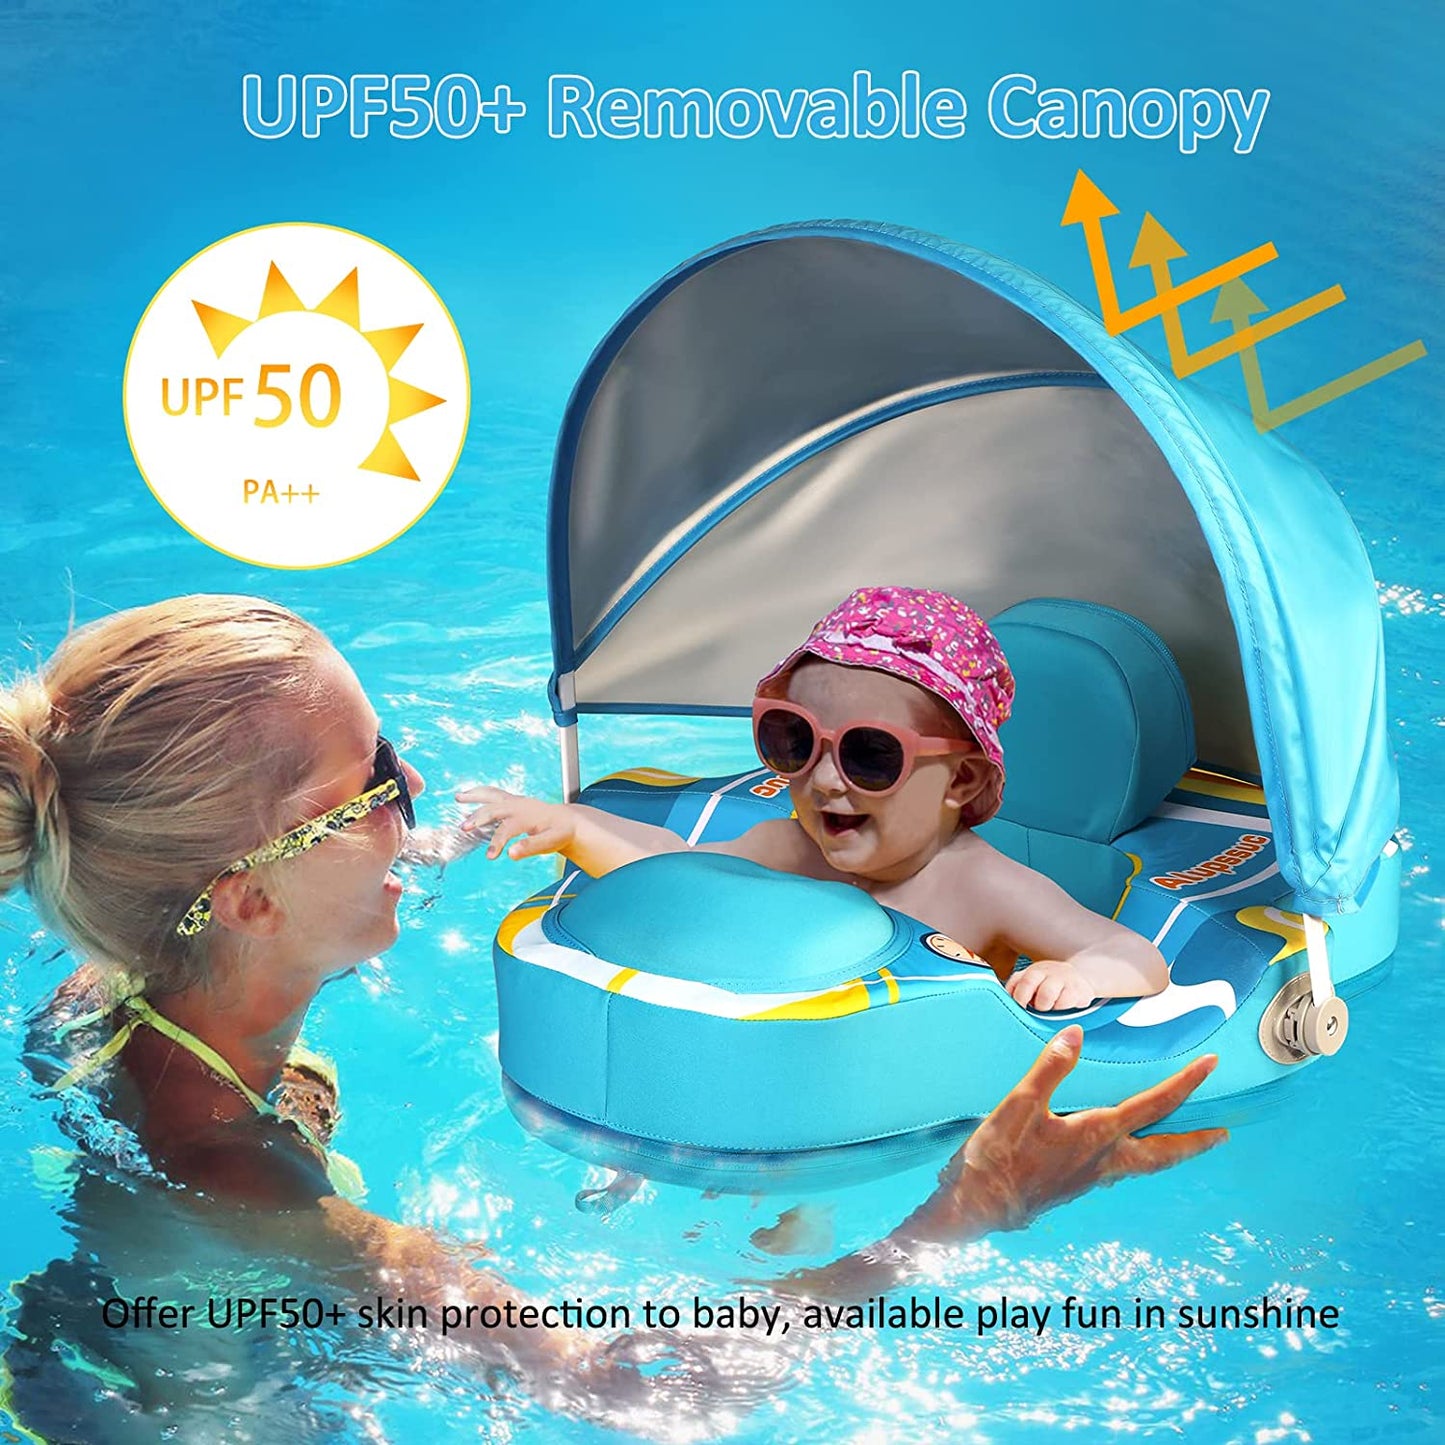 Alupssuc Baby Pool Float with 0-120° Removable UPF 50+ Sun Canopy, Widen Wings No Flip over, Non Inflatable Infant Pool Float with Adjustable Safety Seat, Baby Swim Floats for 3-6-12-24 Months Toddler